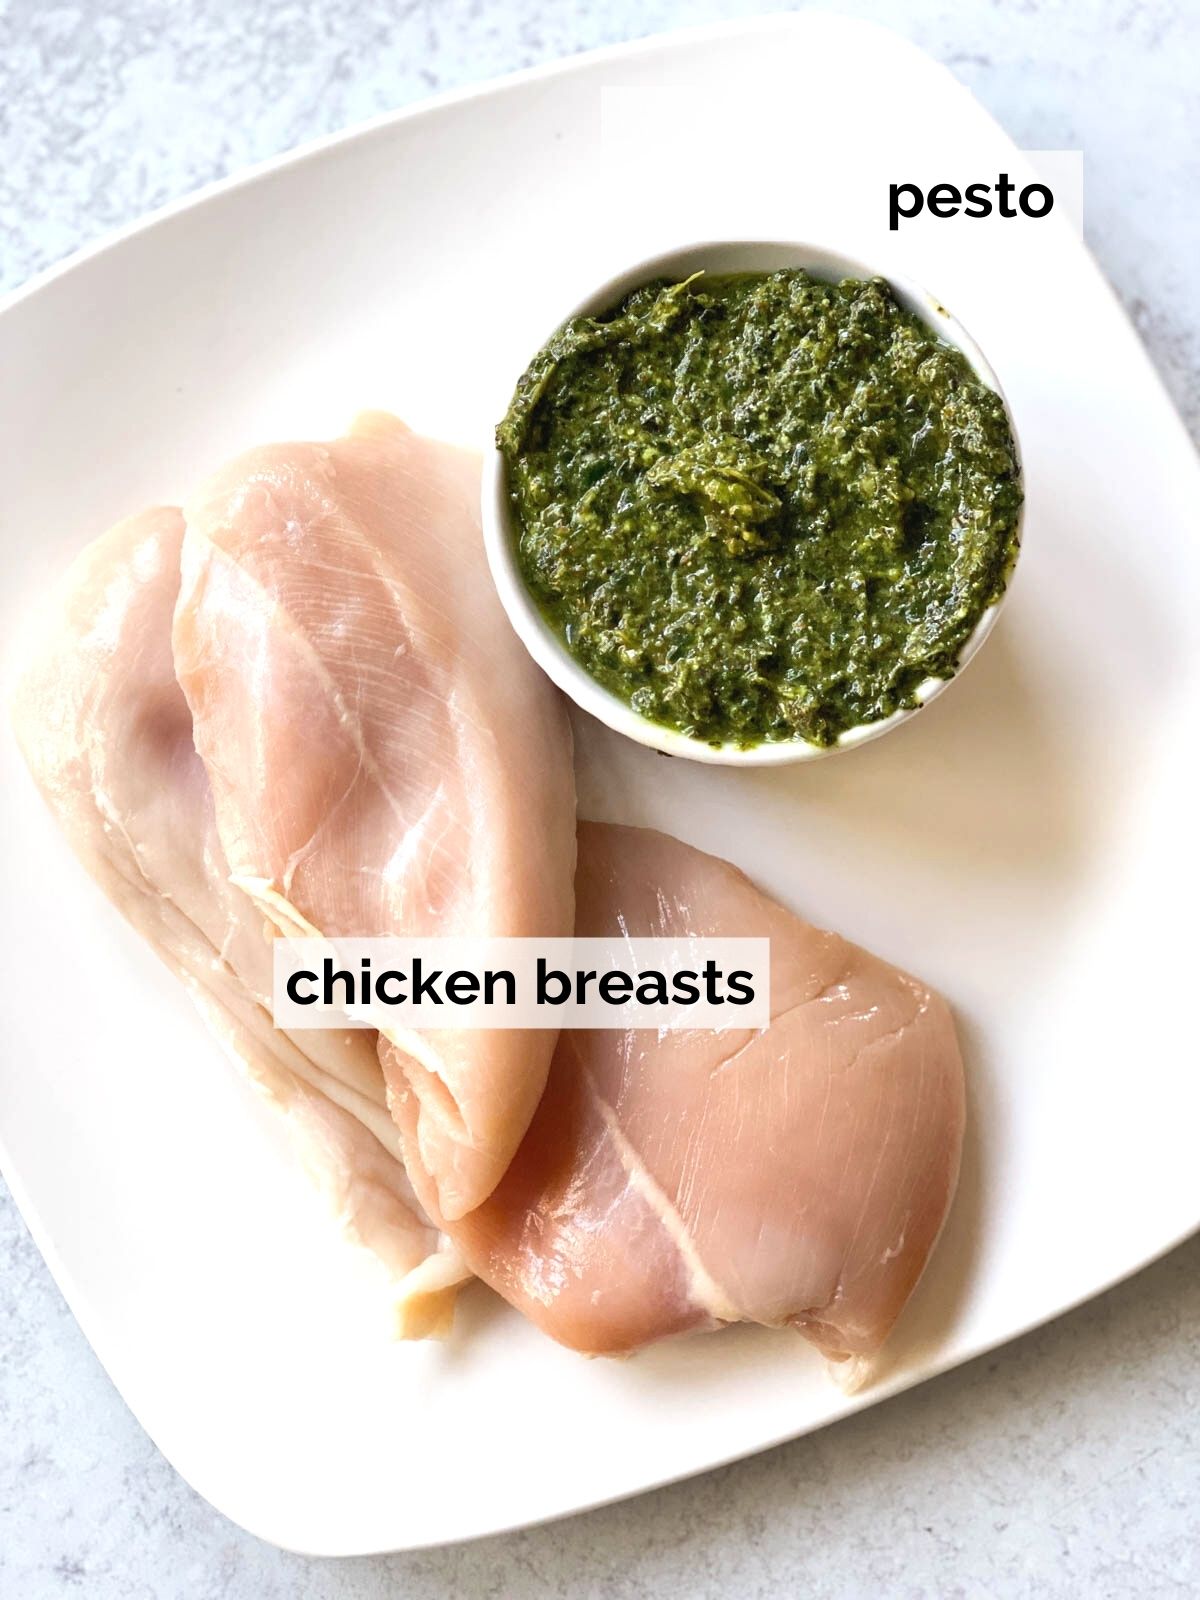 Raw chicken next to pesto on a plate.